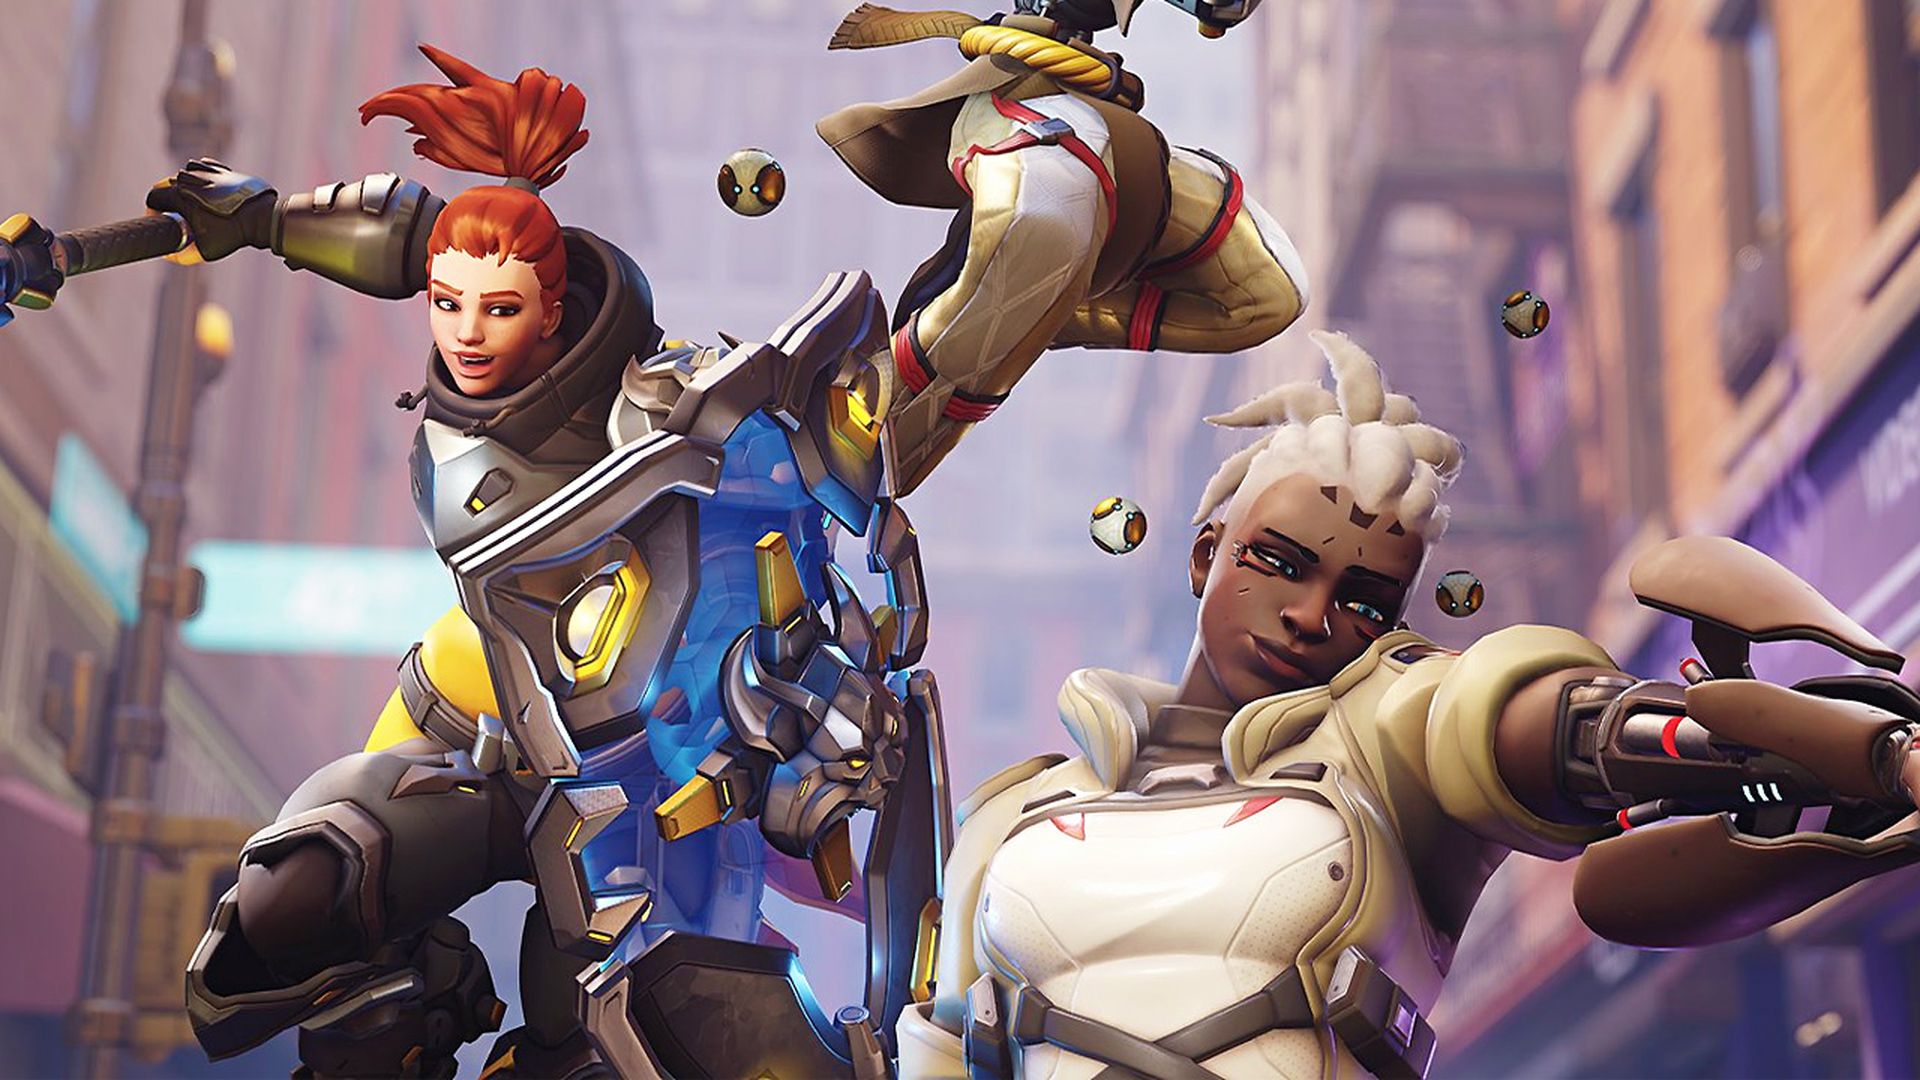 In this article, we are going to be covering how to play Overwatch 2 without a phone number, so you can access the new game without any more delays.